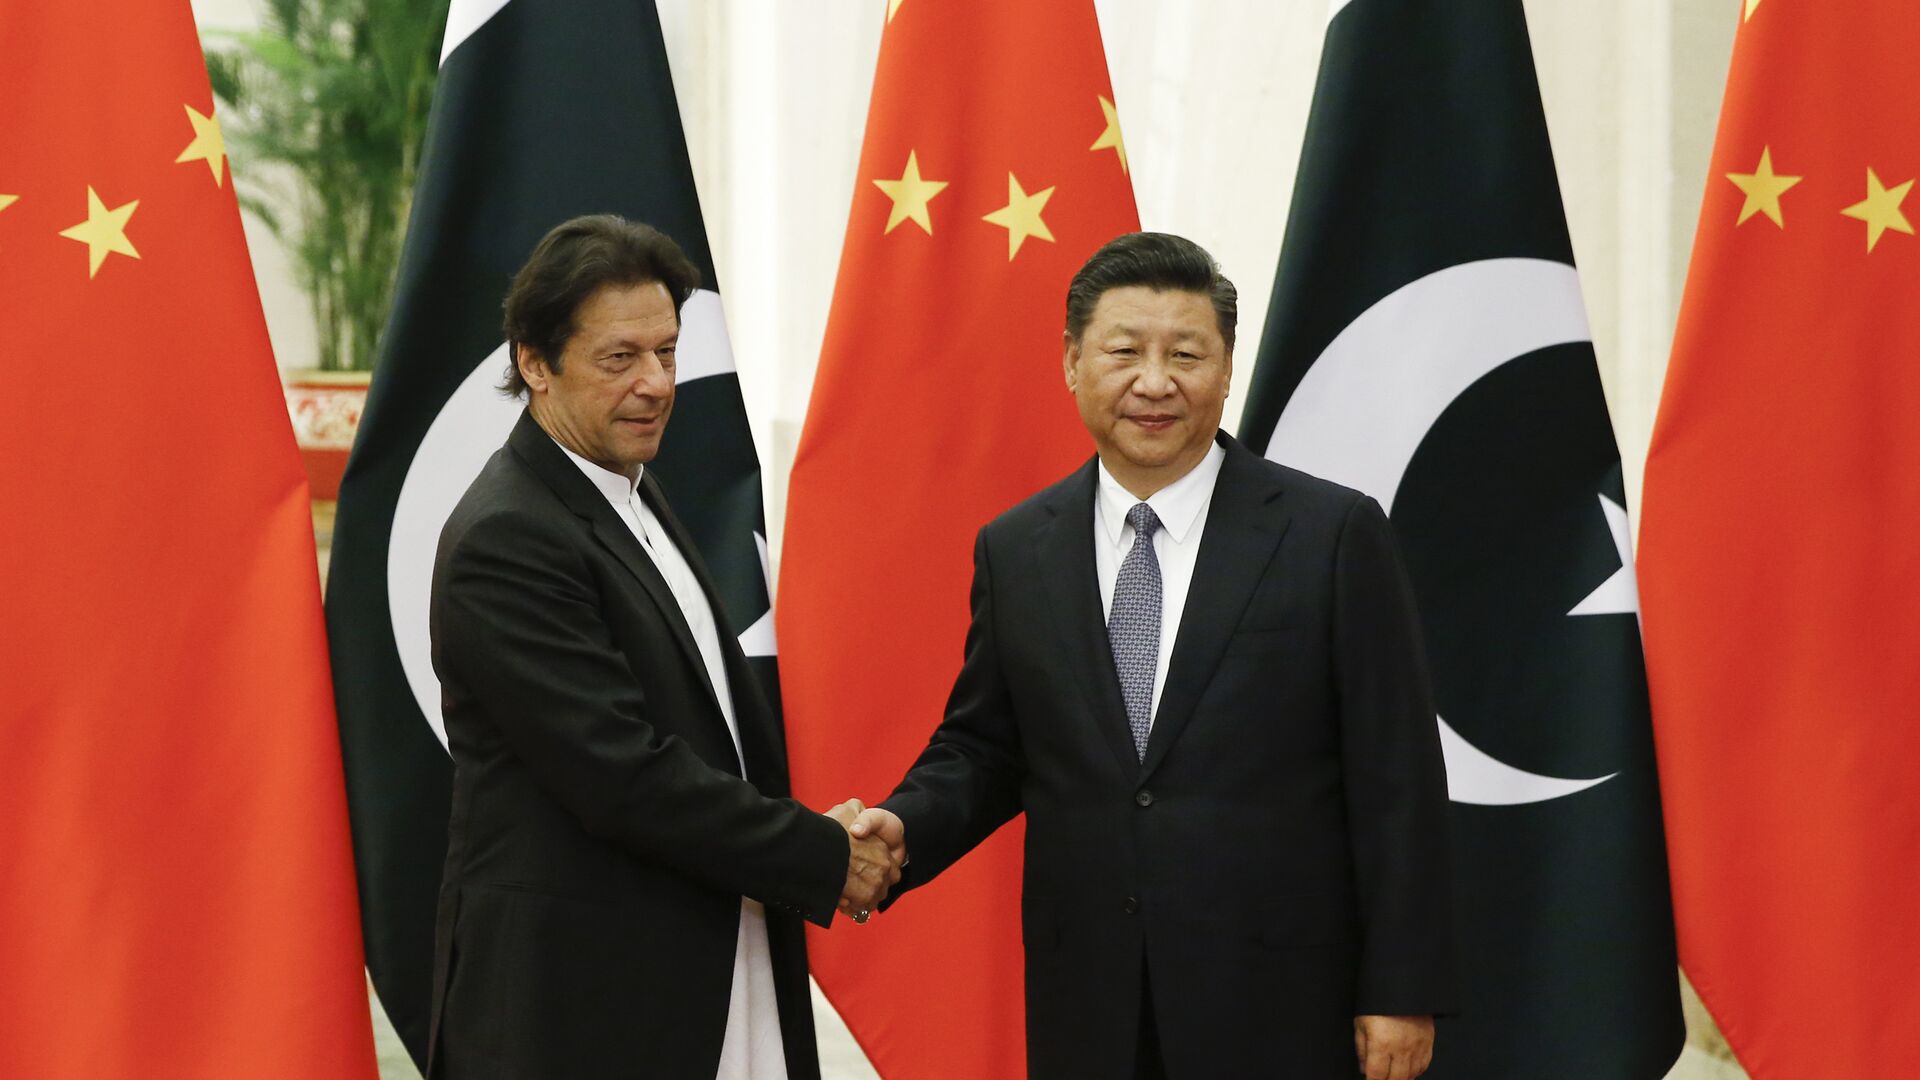 China's President Xi Jinping, right, meets Pakistan's Prime Minister Imran Khan at the Great Hall of the People in Beijing, Friday, Nov. 2, 2018 - Sputnik International, 1920, 04.06.2021